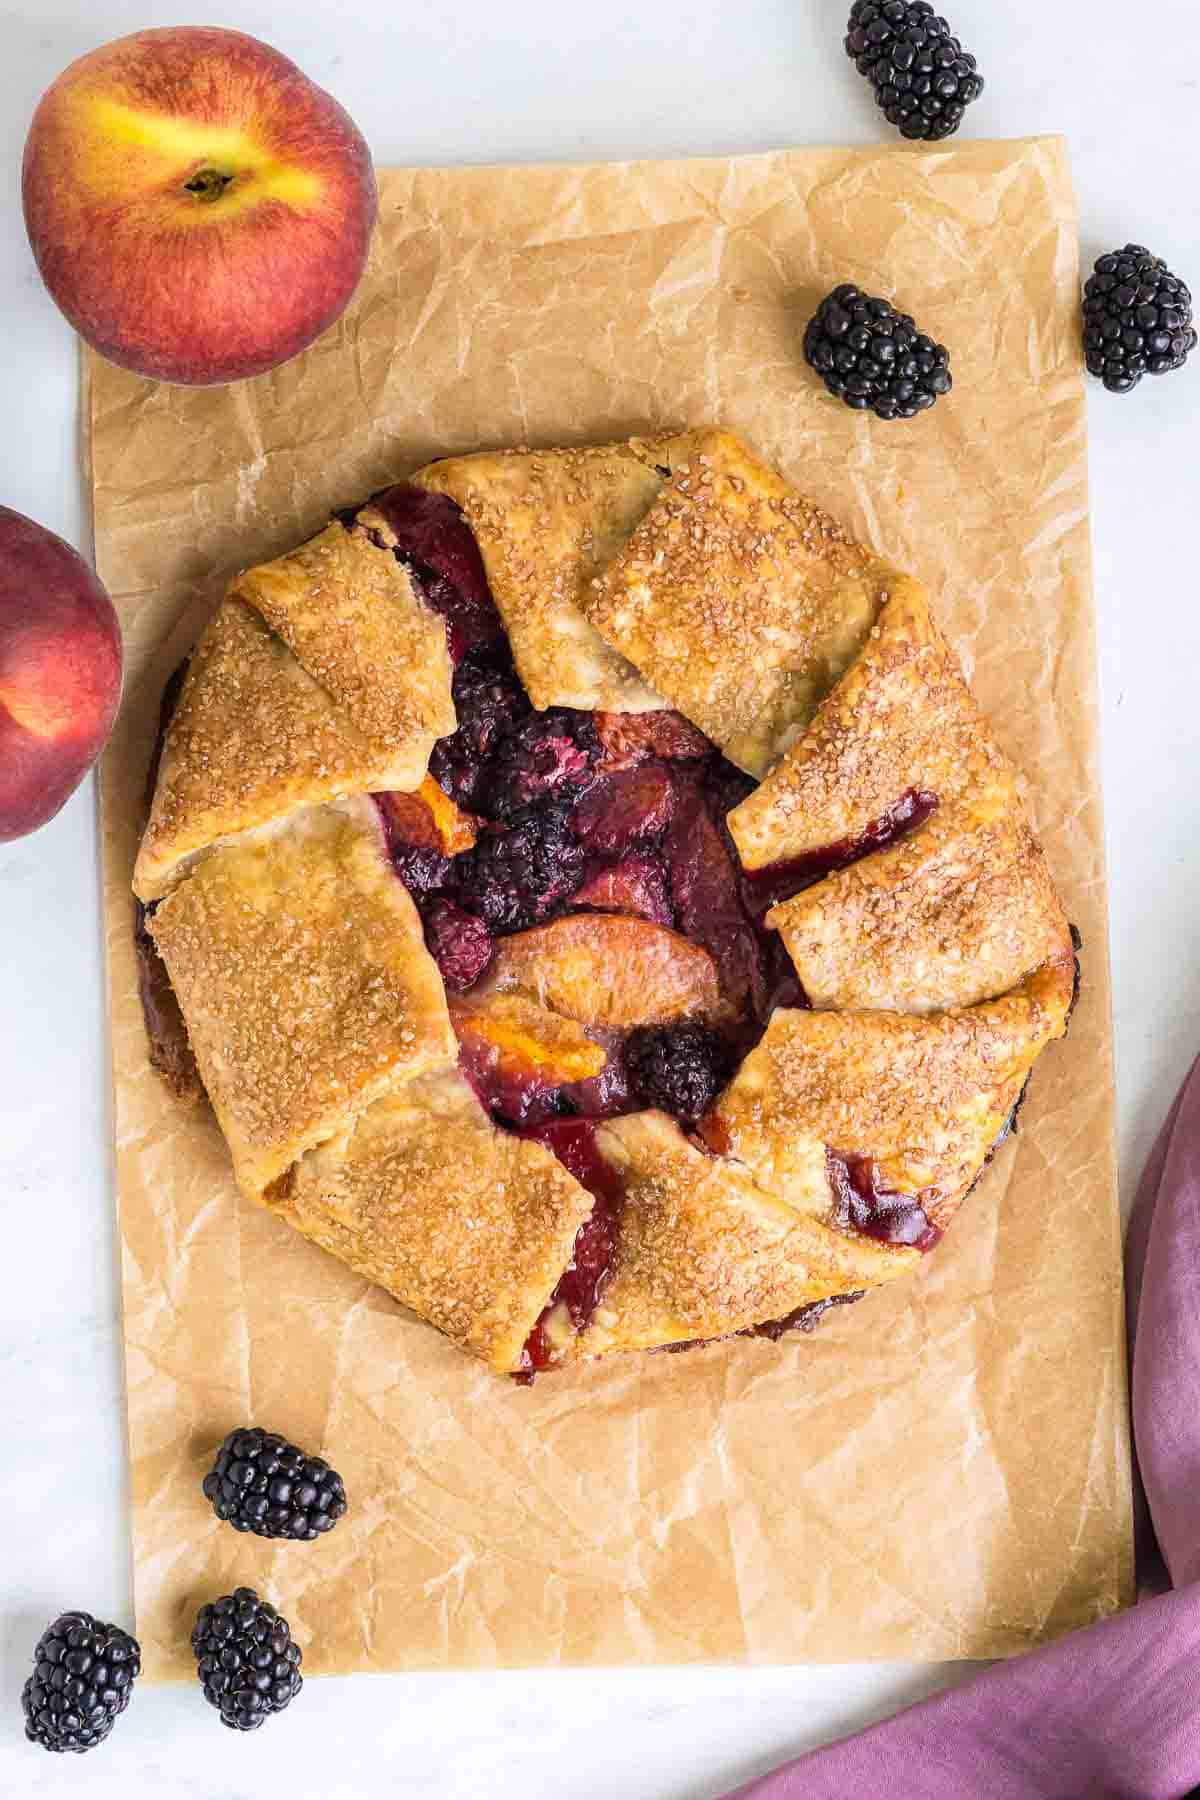 A rustic peach and blackberry galette on parchment paper, surrounded by fresh blackberries and peaches.